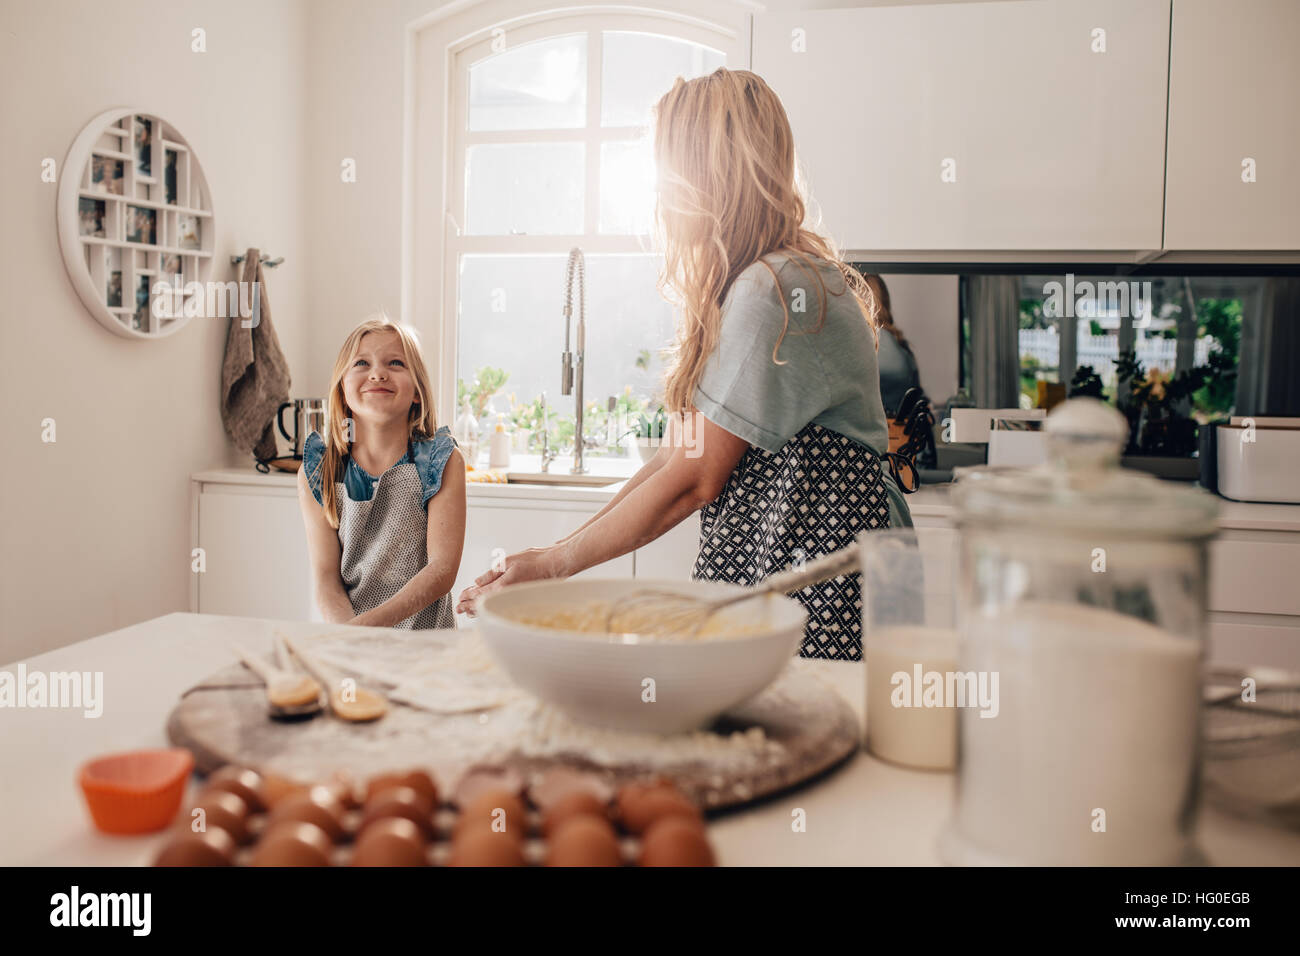 Happy little girl standing in kitchen and her mother cooking food. Mother and happy daughter baking in kitchen. Stock Photo